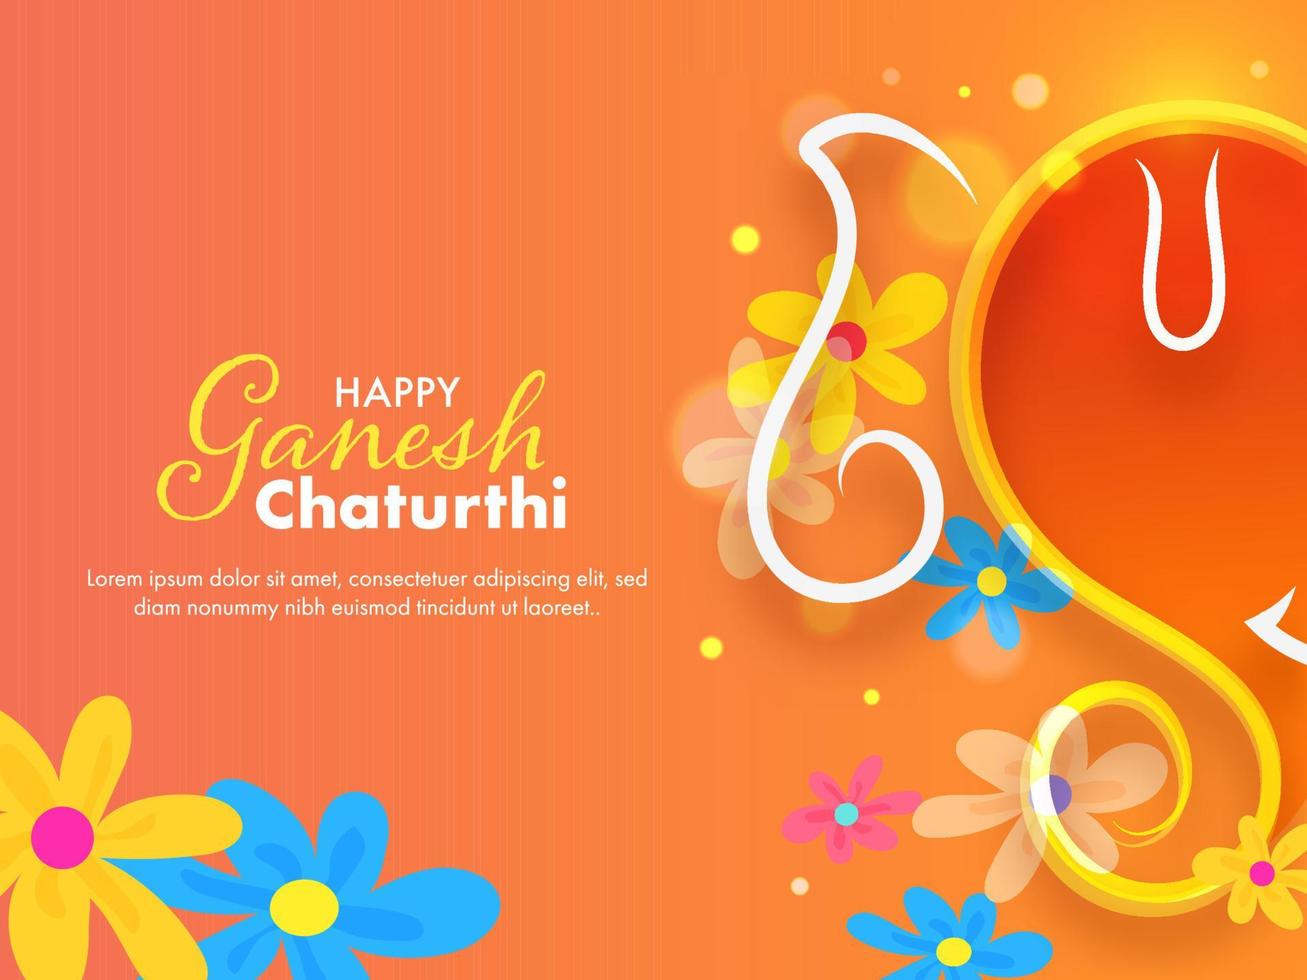 Line Art Lord Ganesha Face With Colorful Flowers Decorated On Glossy Orange Background For Happy Ganesh Chaturthi. vector